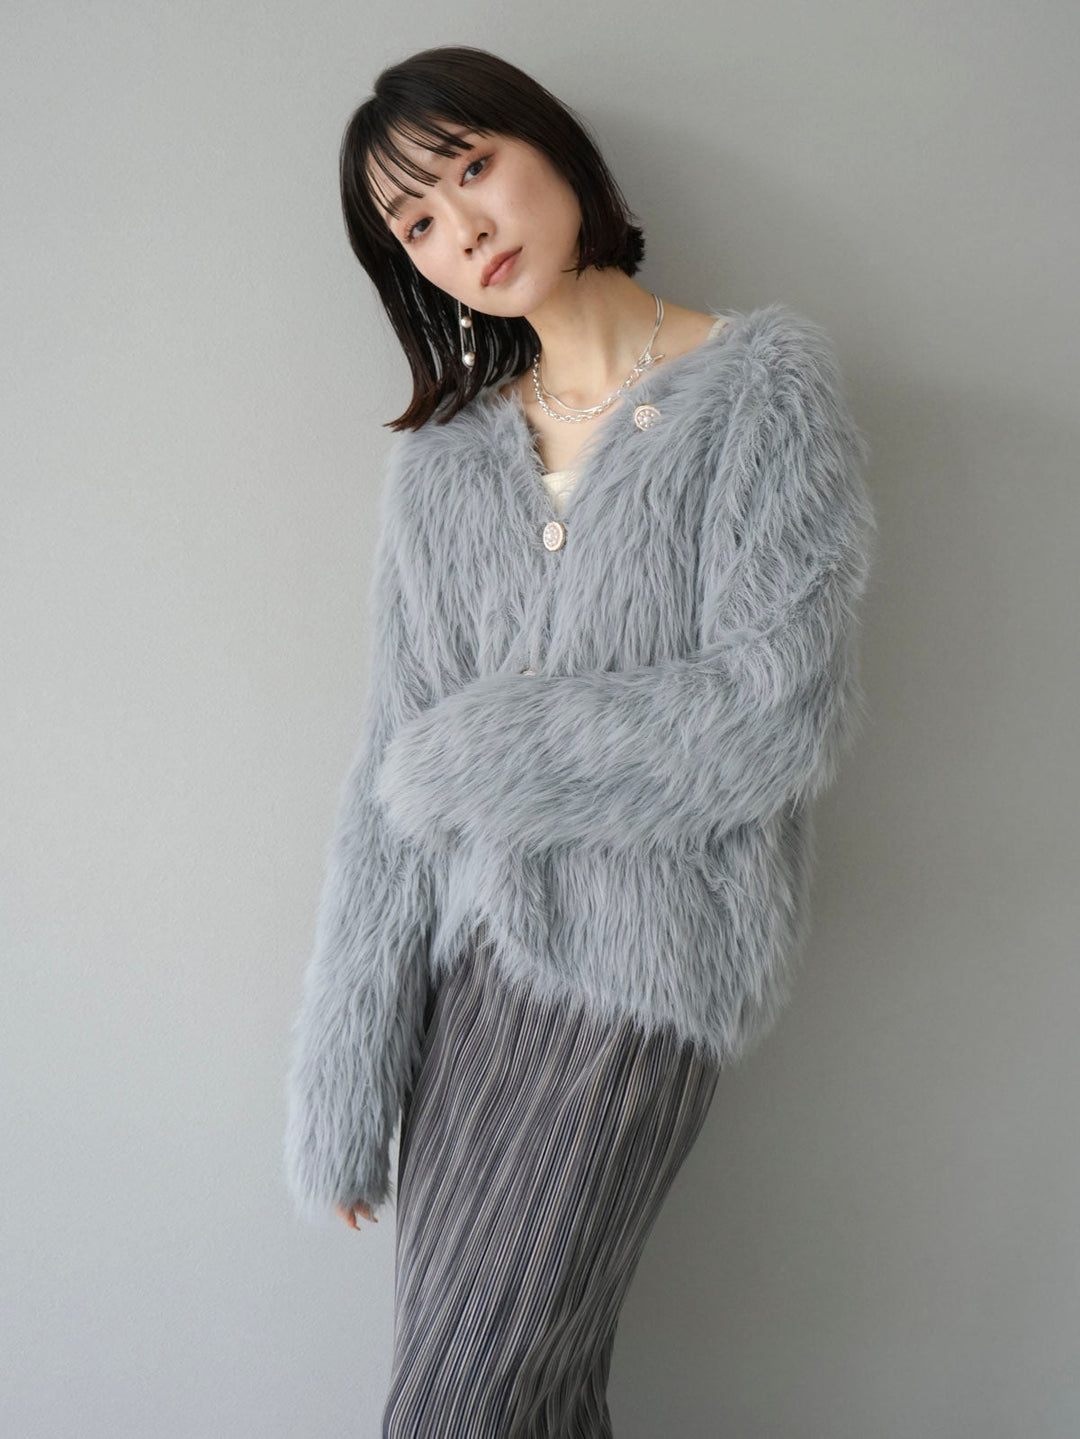 [SET] Pearl design button shaggy knit cardigan + choice of necklace (2 sets)